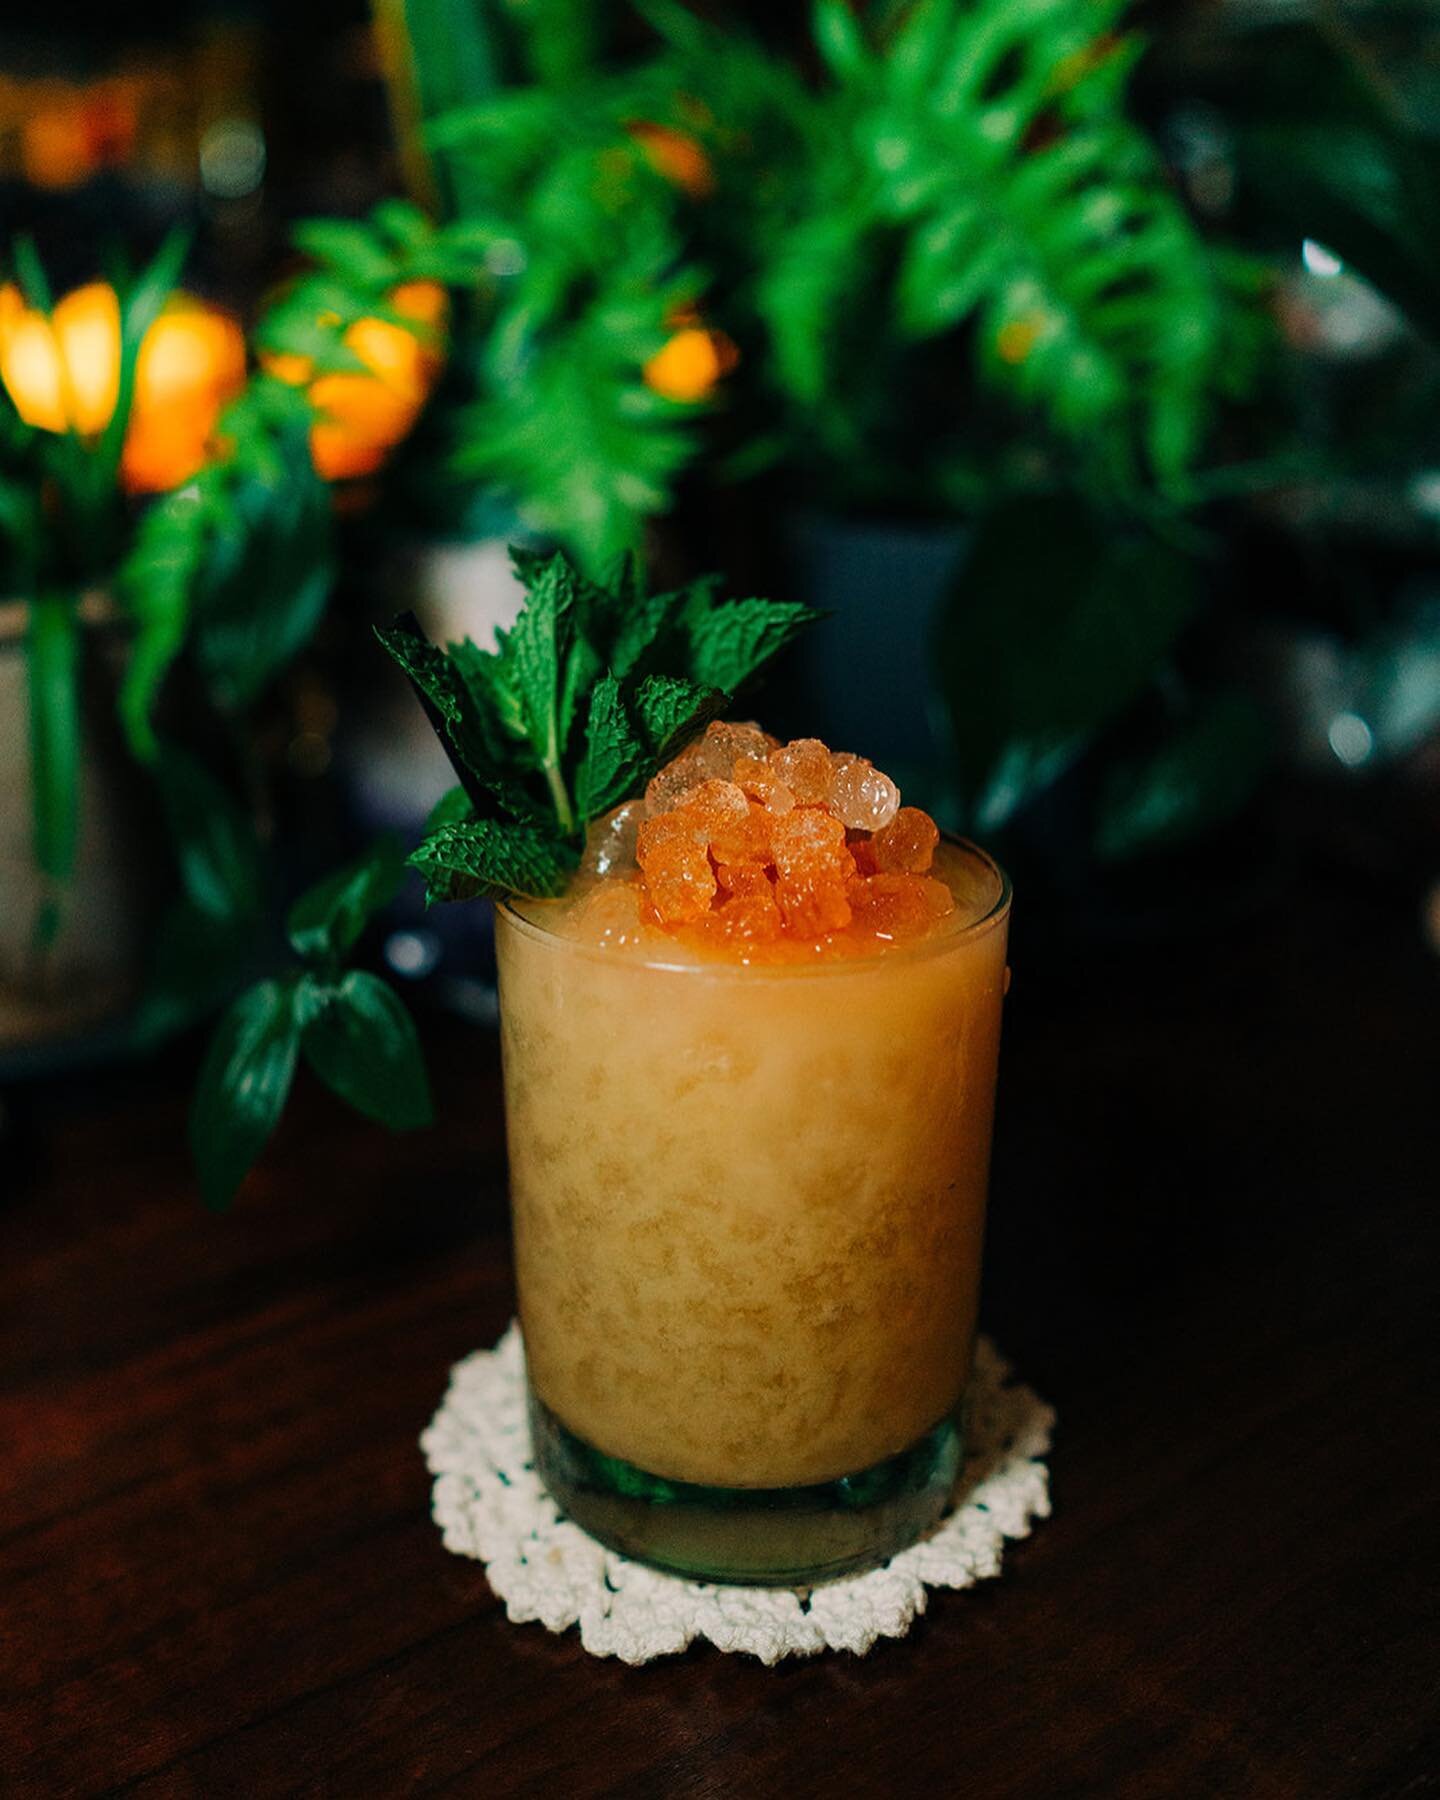 A Wax Wednesday at @waterbearbar 🌿🎧! Here are some of my fav shots from our shoot last week. 

Featuring a Mai Tai (the best in Boise), DJ @kelseyannhall with a Honeymooner, Drambuze, Bitters &amp; Soda,
Maximilian Affair inspired by @mistymezkalko